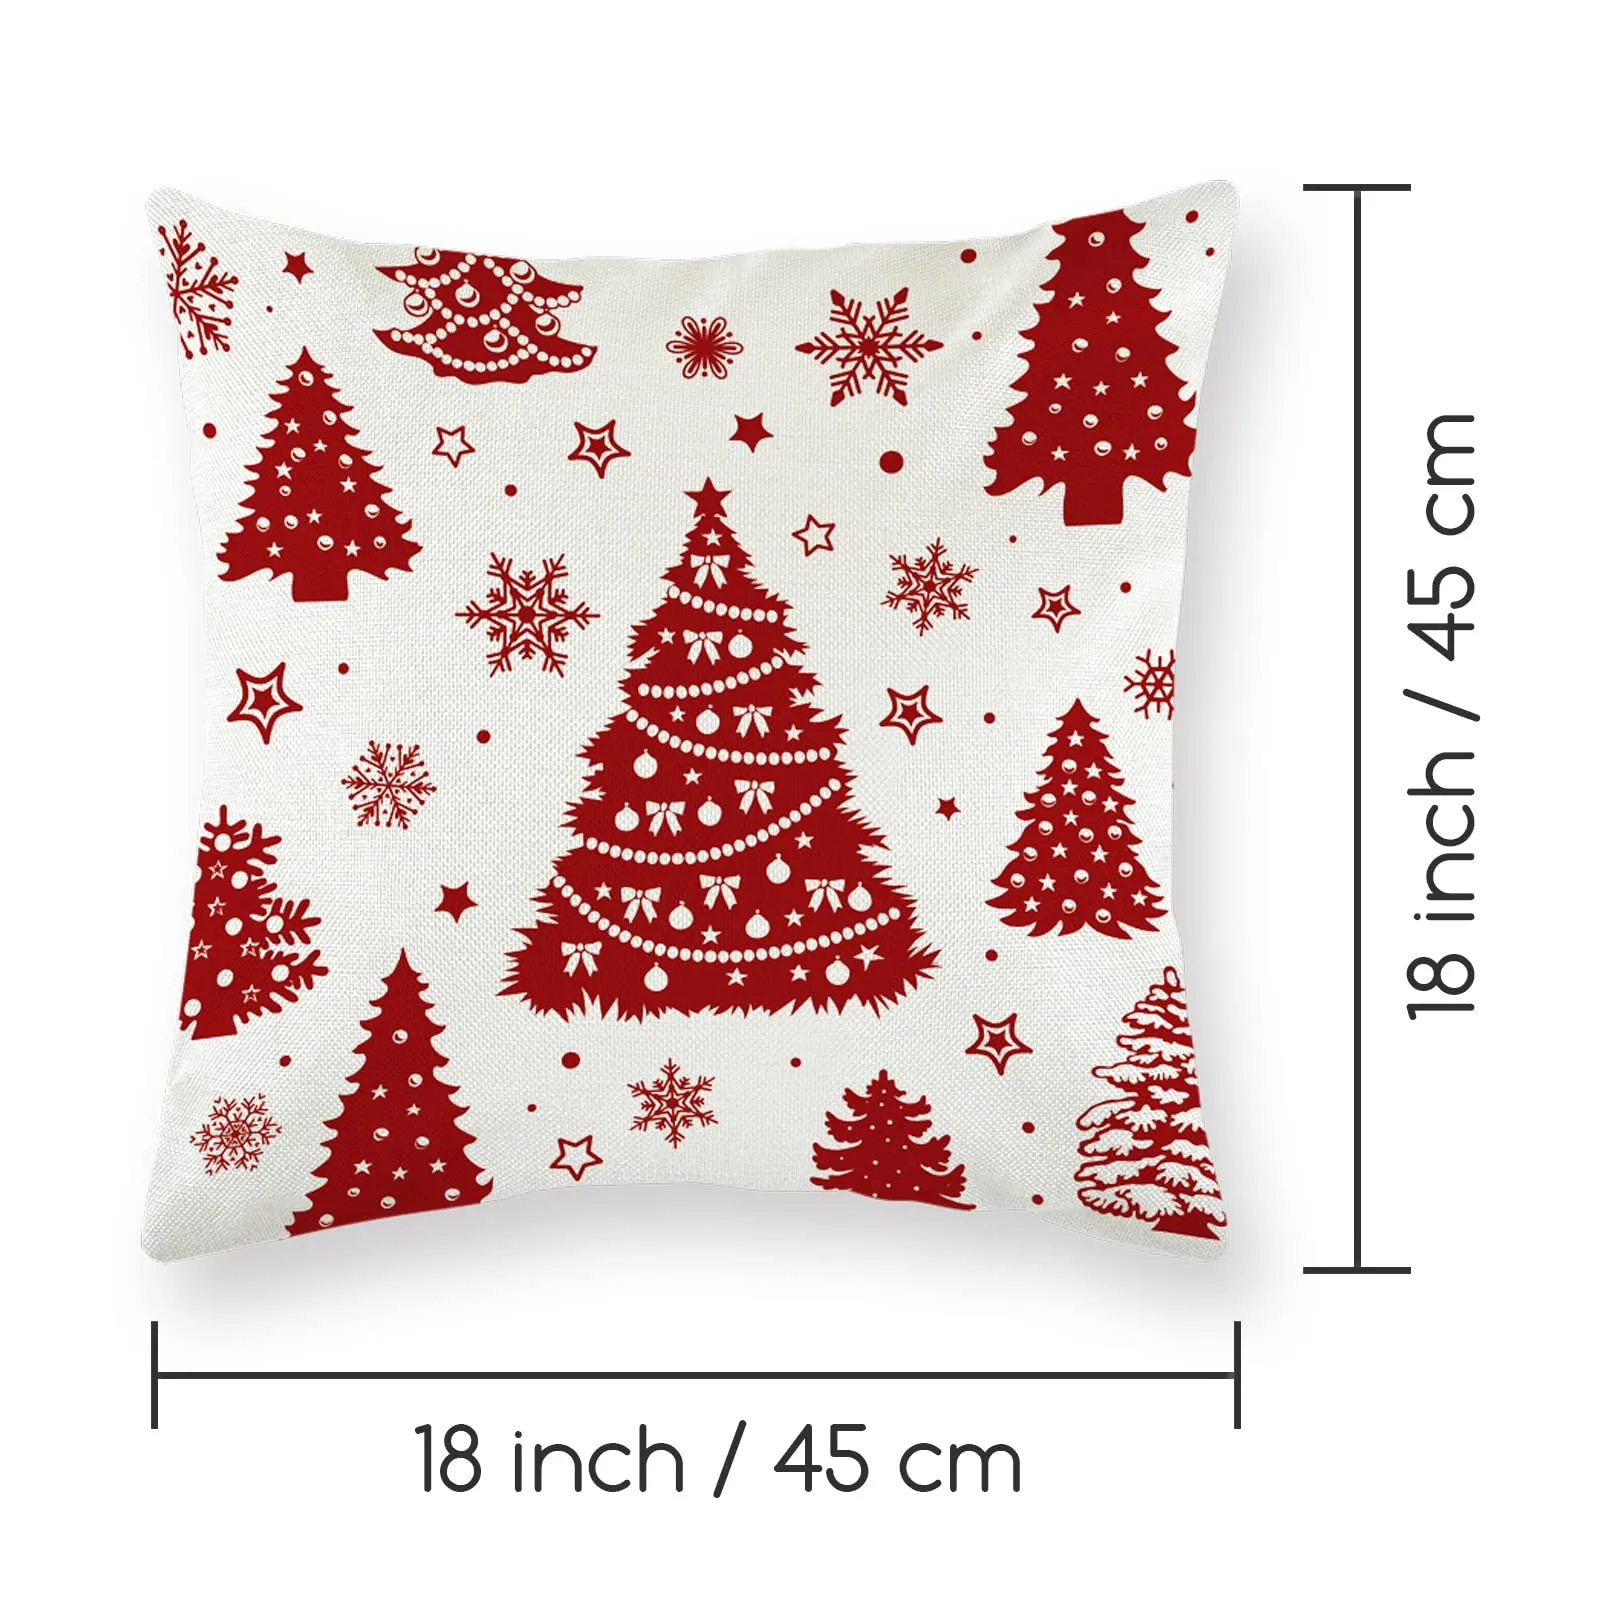 christmas pillow covers 18x18 set of 4, rustic christmas pillow cases holiday throw pillows cases covers for christmas home decorations